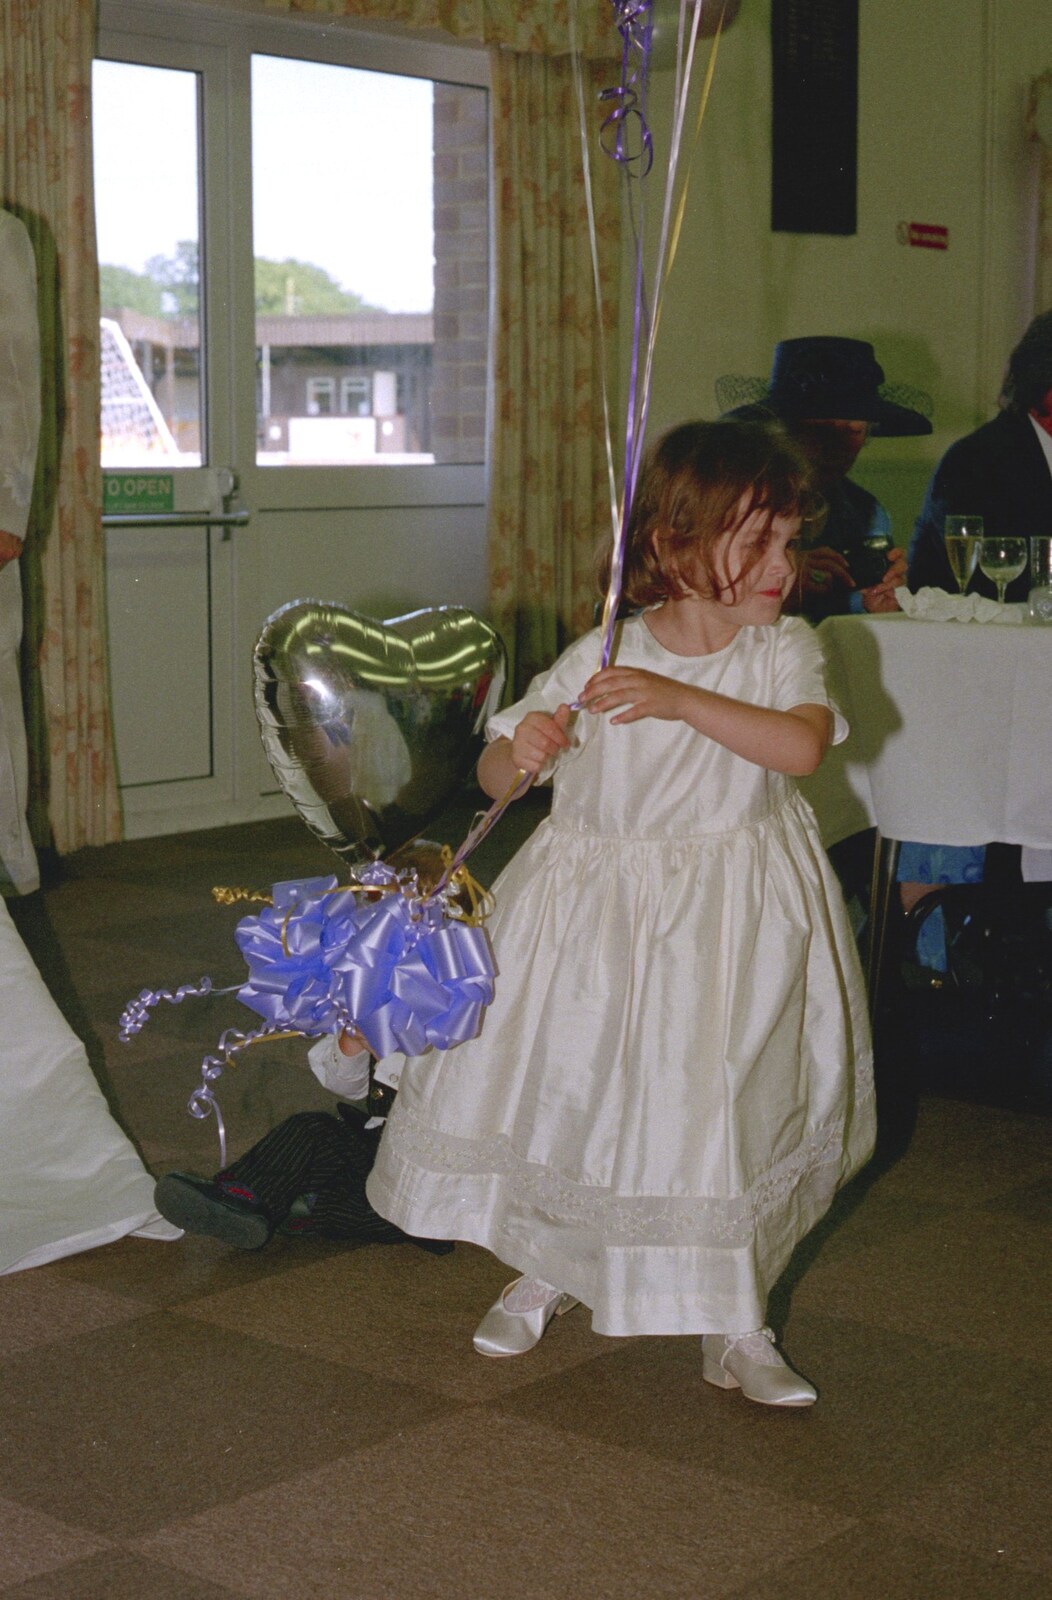 A bridesmaid roams around with balloons from Sean and Michelle's Wedding, Bashley FC, New Milton - 12th August 2000